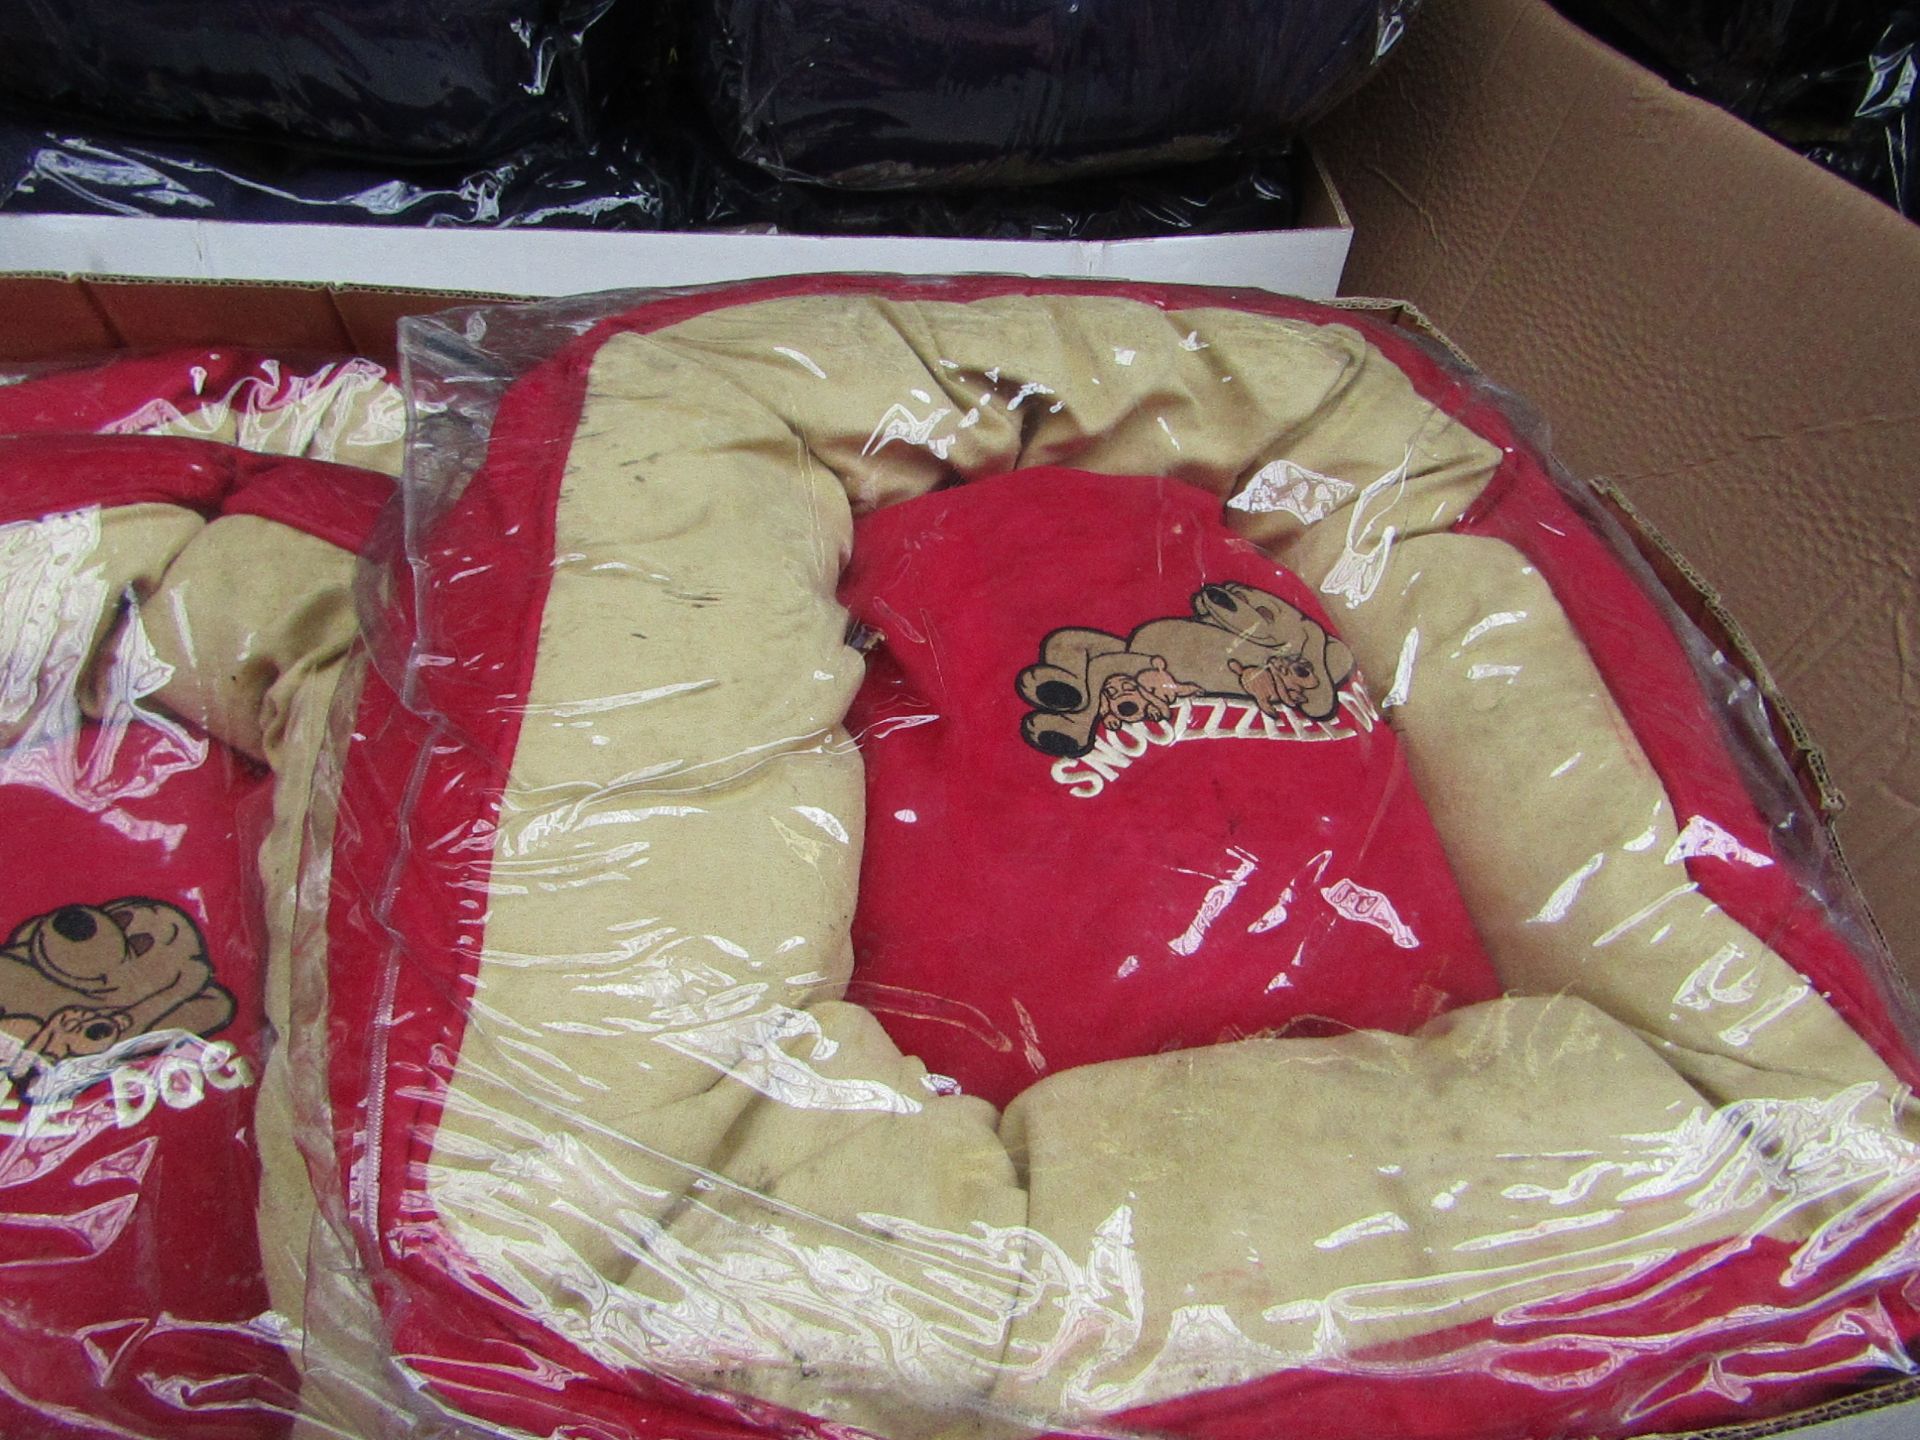 5x Snoozzzeee Dog - Cherry Red Donut Dog Bed (Size 1) - All New & Packaged.